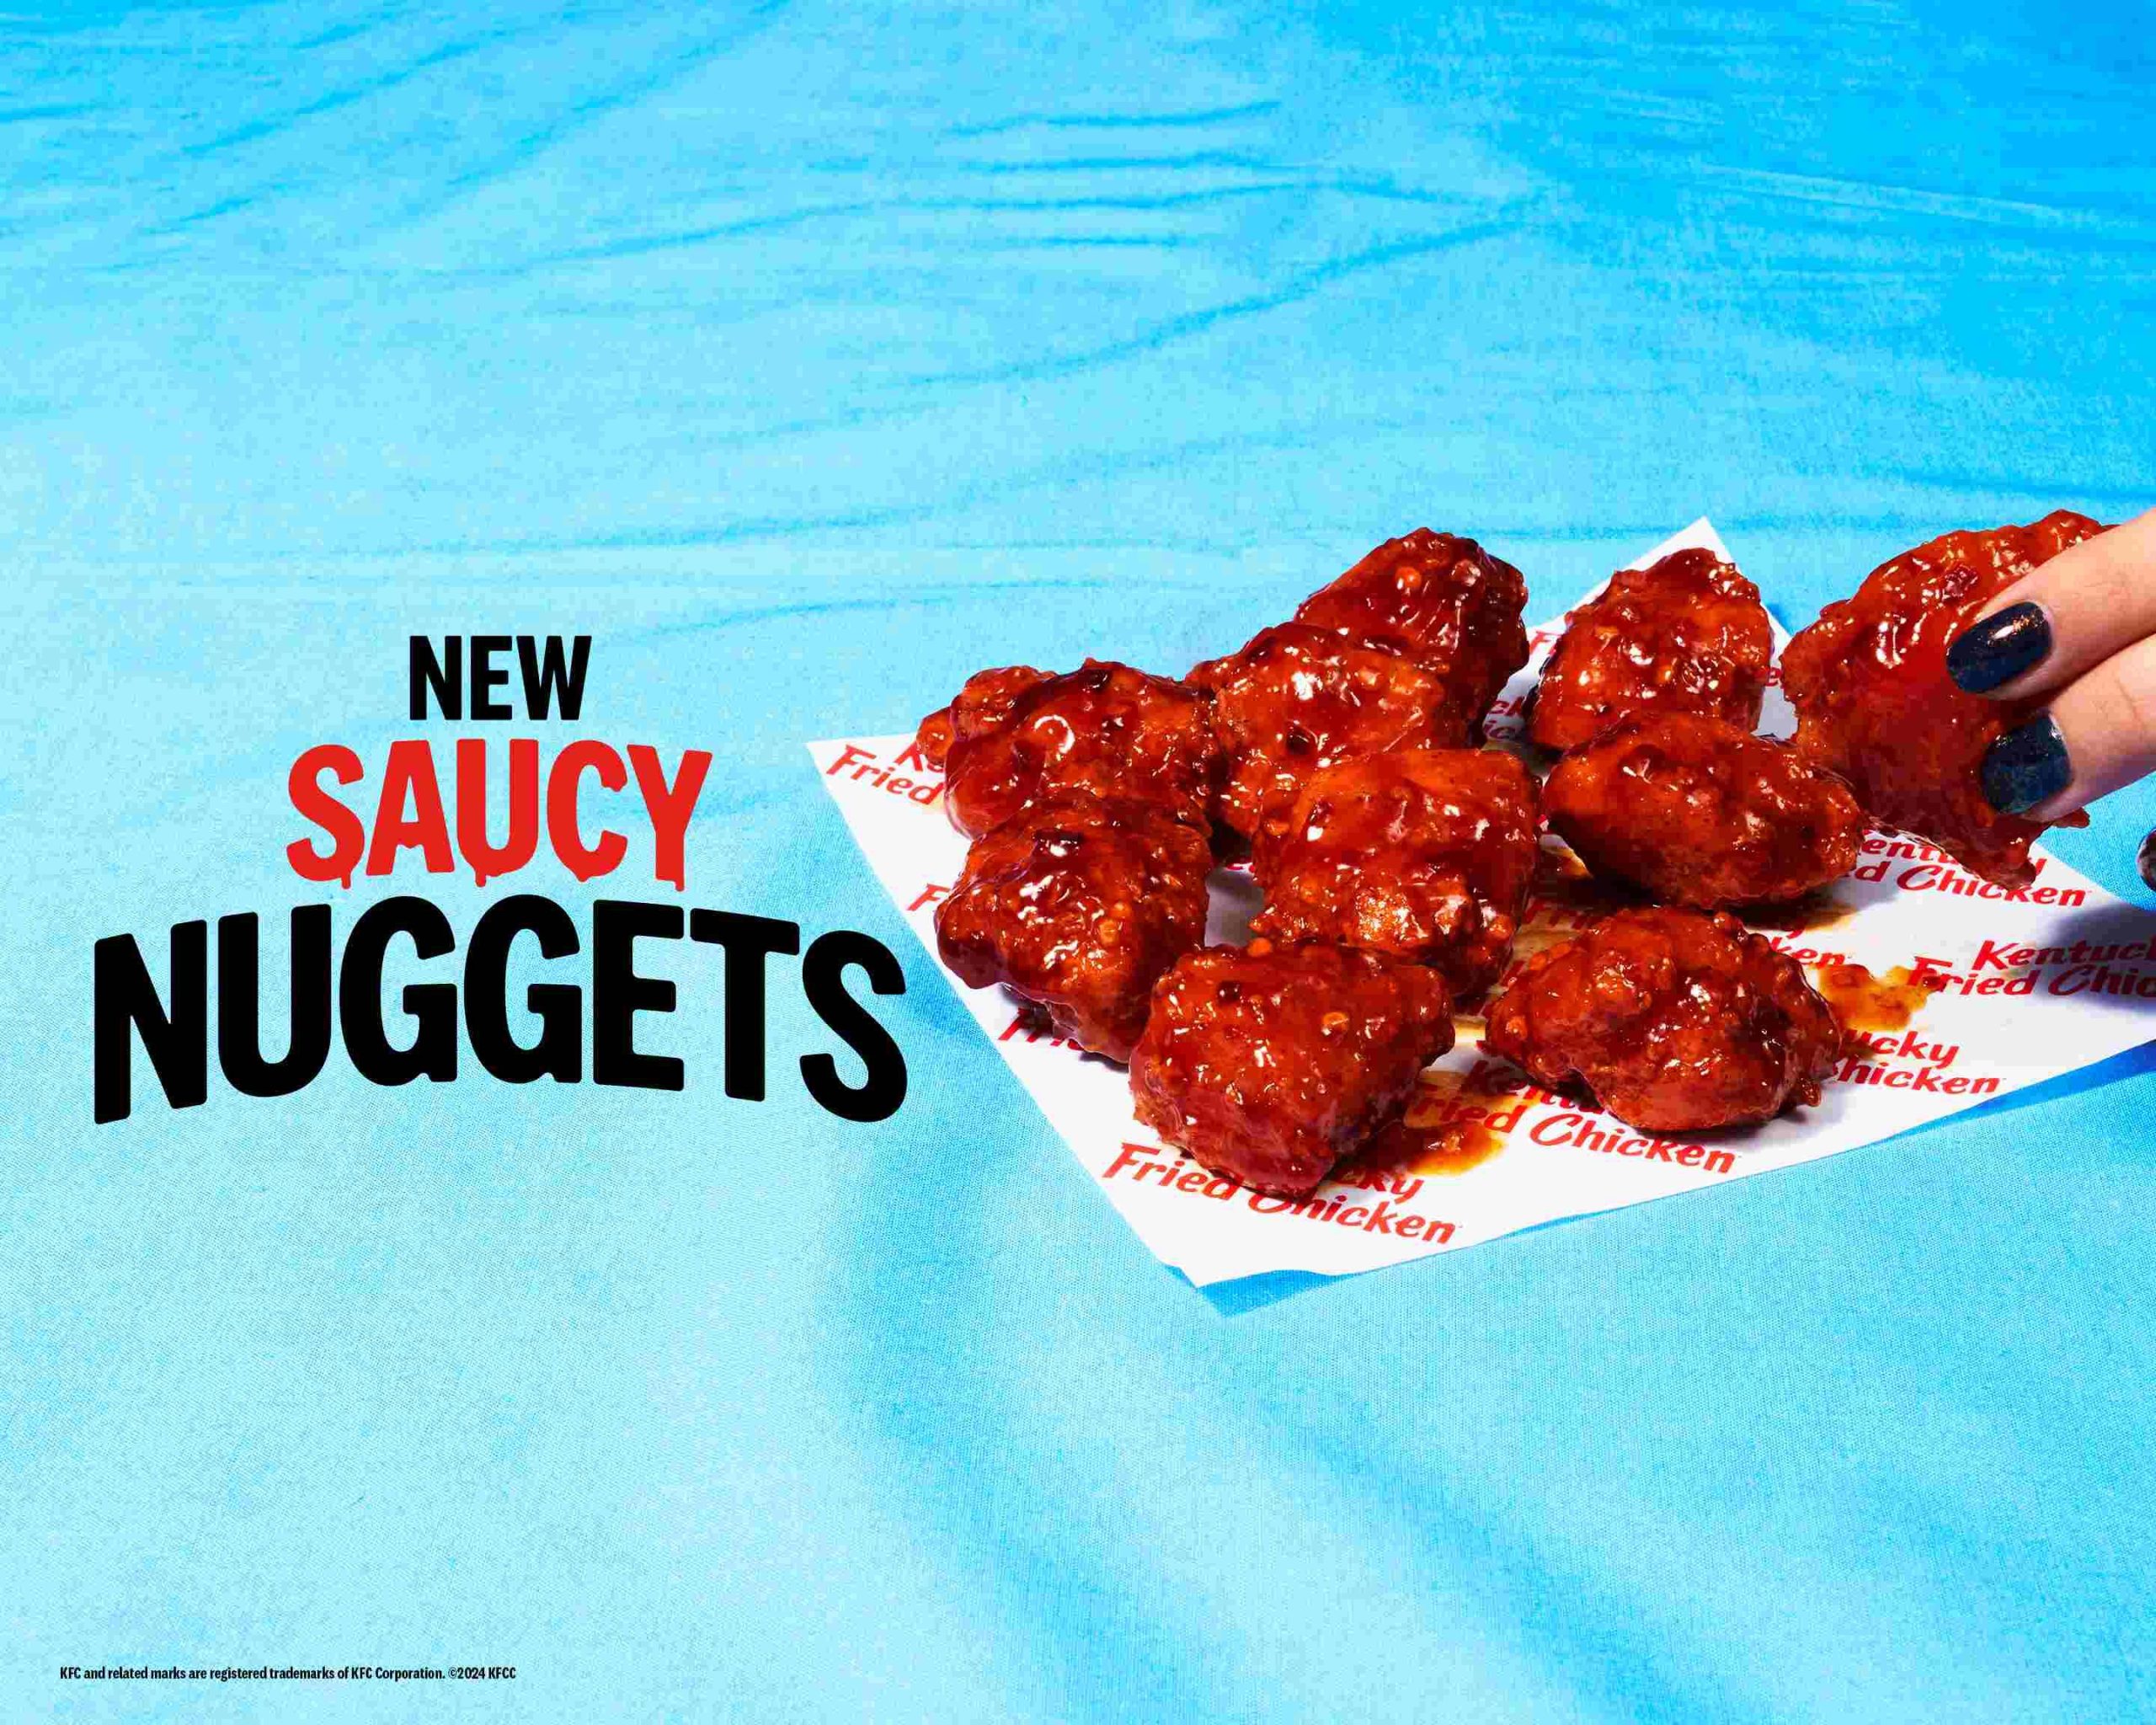 KFC’s New Saucy Nuggets Take Flavor to the Next Level